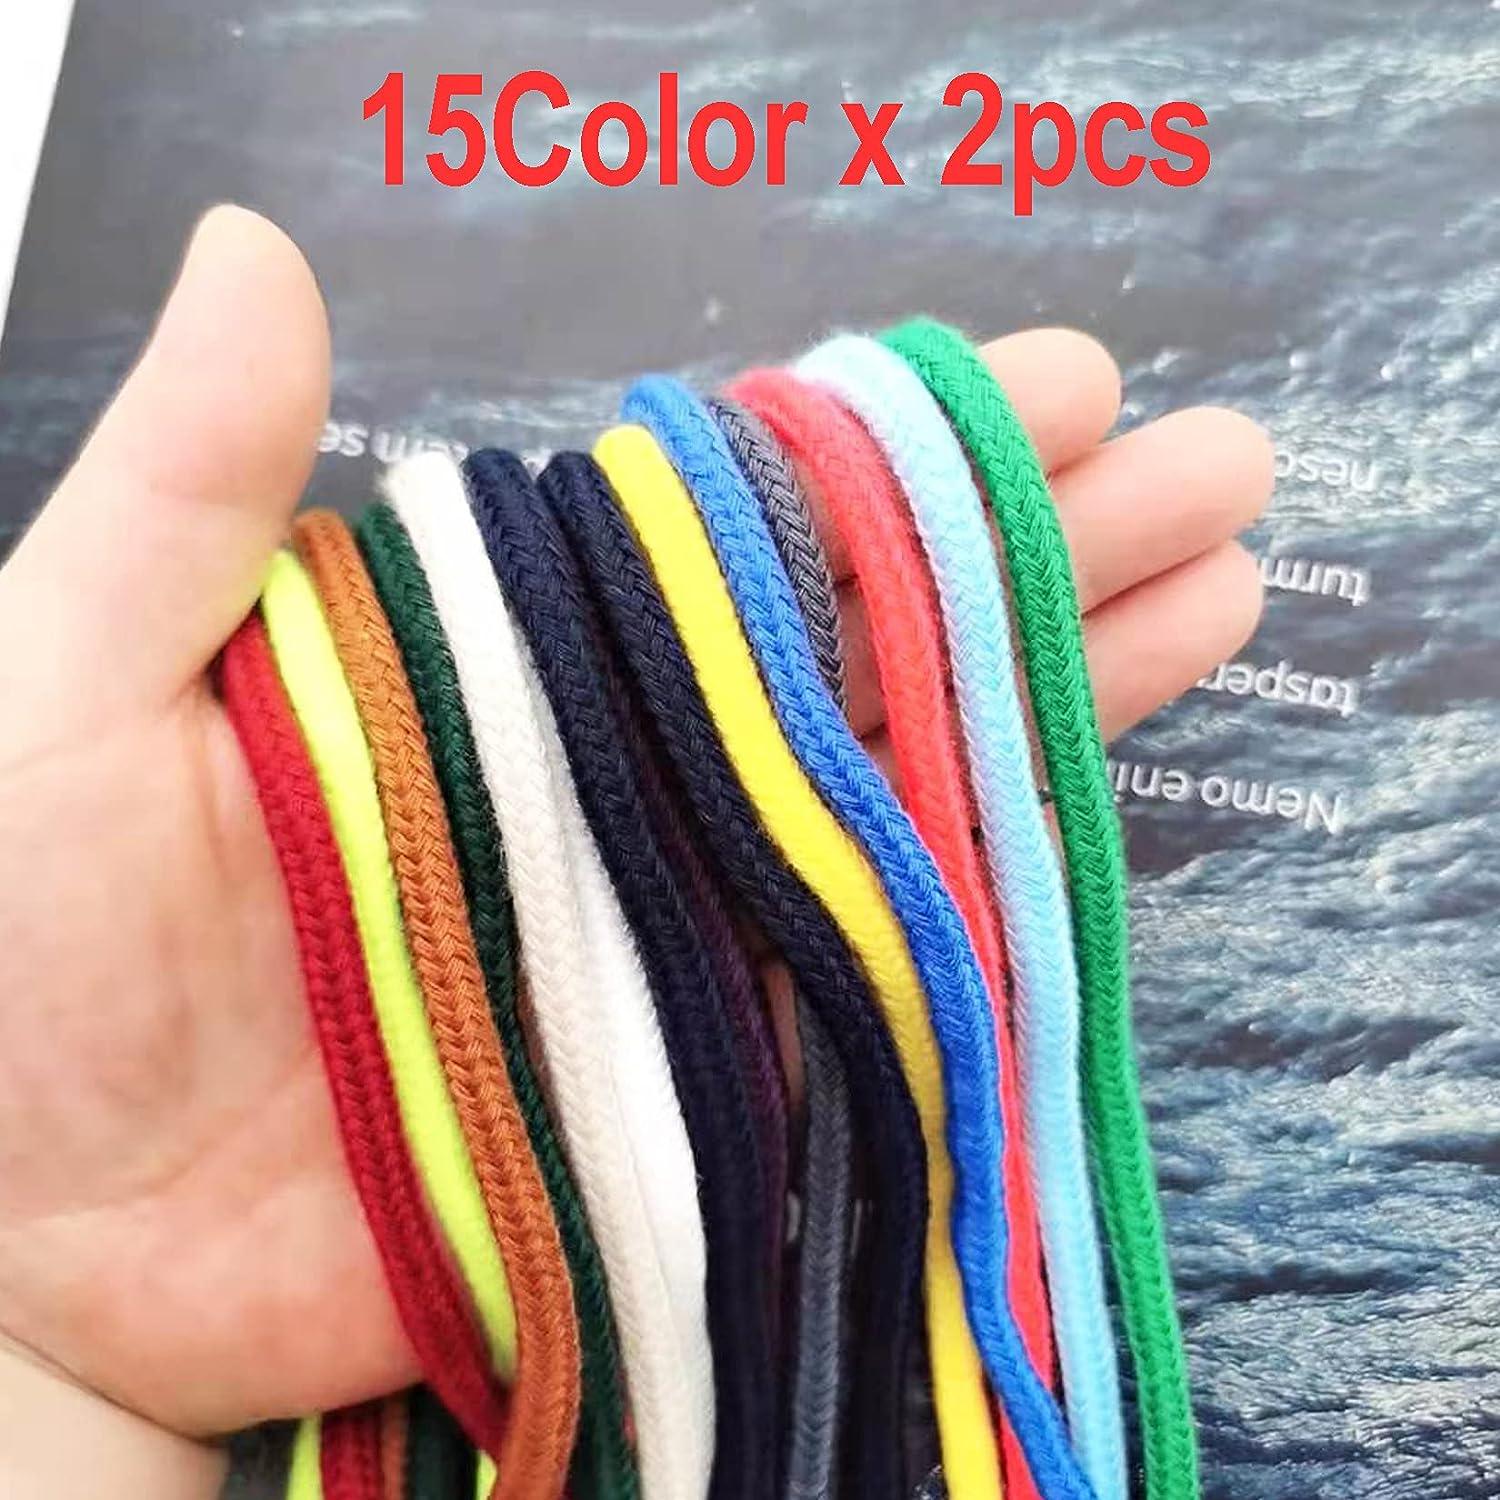 Luckkyme 8 Pack Replacement Drawstrings Drawcords for Pants